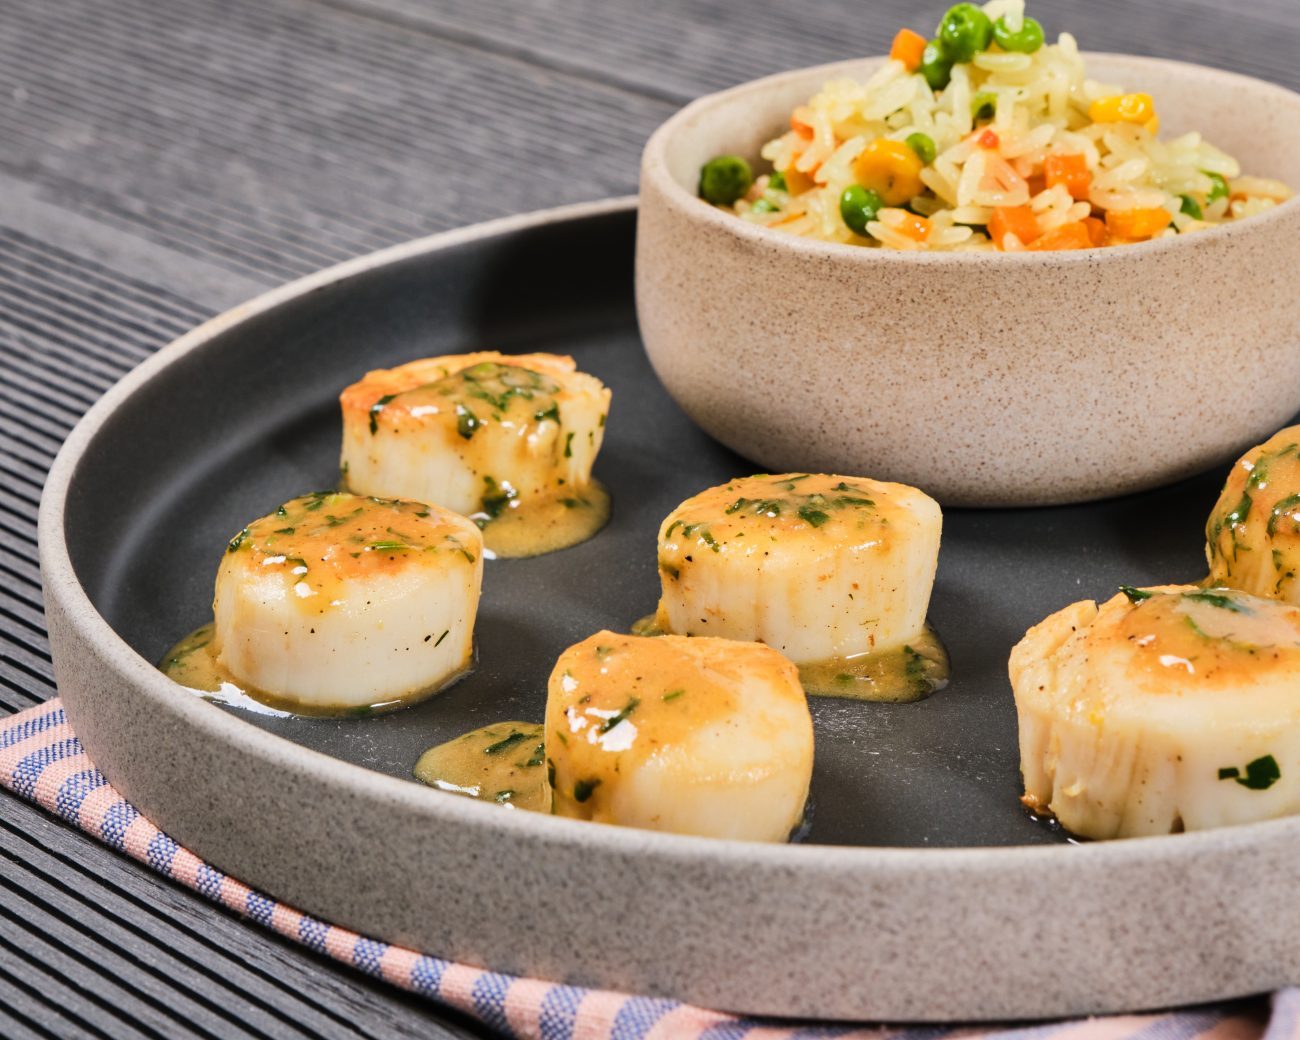 Scallops with Lemon and Parsley served with Vegetable Rice